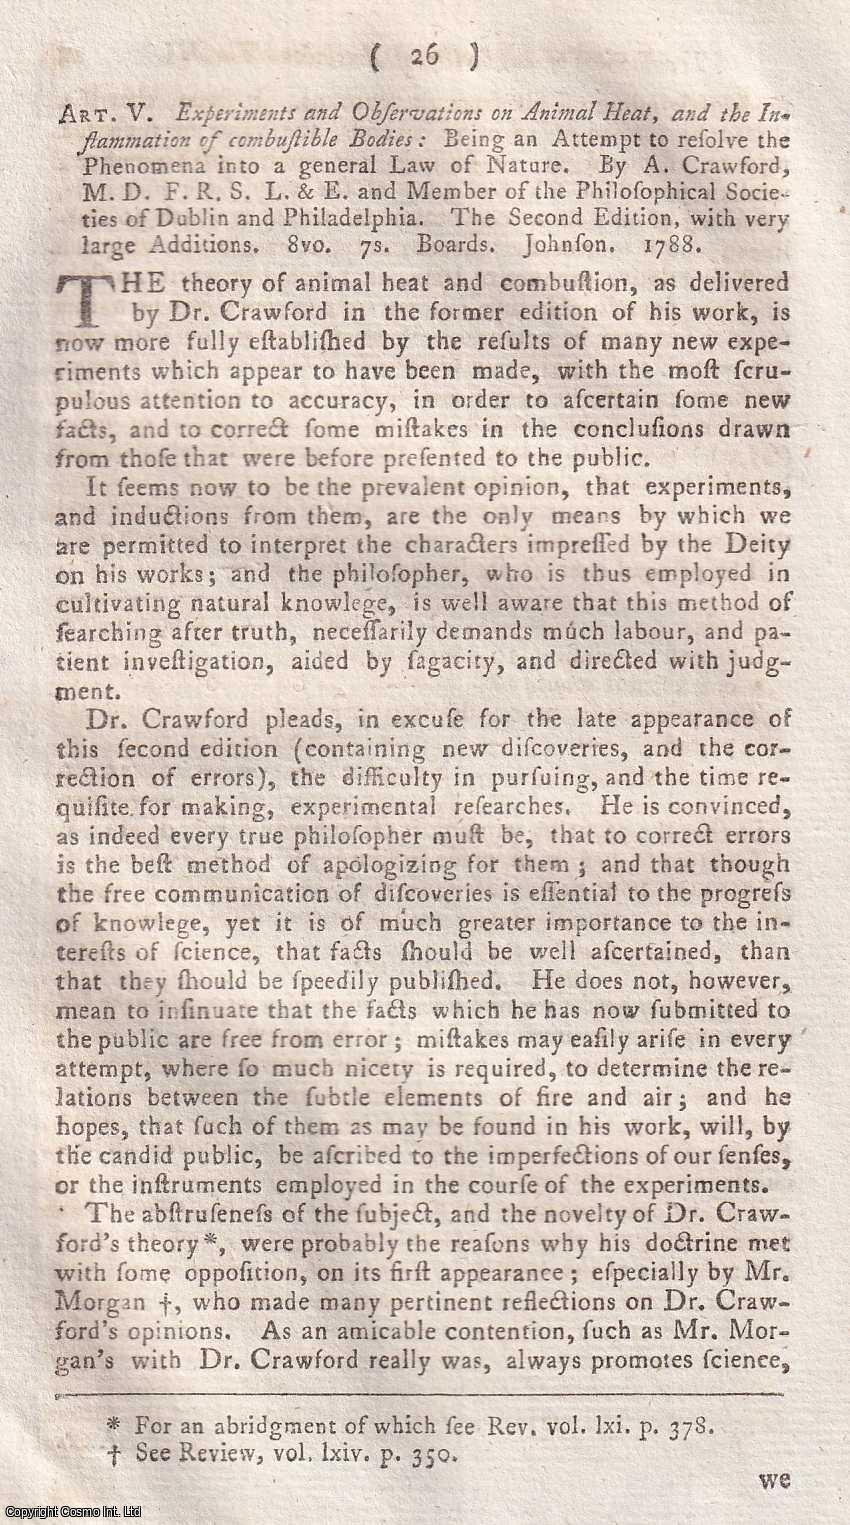 Author Not Stated - Experiments and Observations on Animal Heat, and the Inflammation of combustible Bodies, by A. Crawford. An original essay from the Monthly Review, 1789. No author is given for this article.